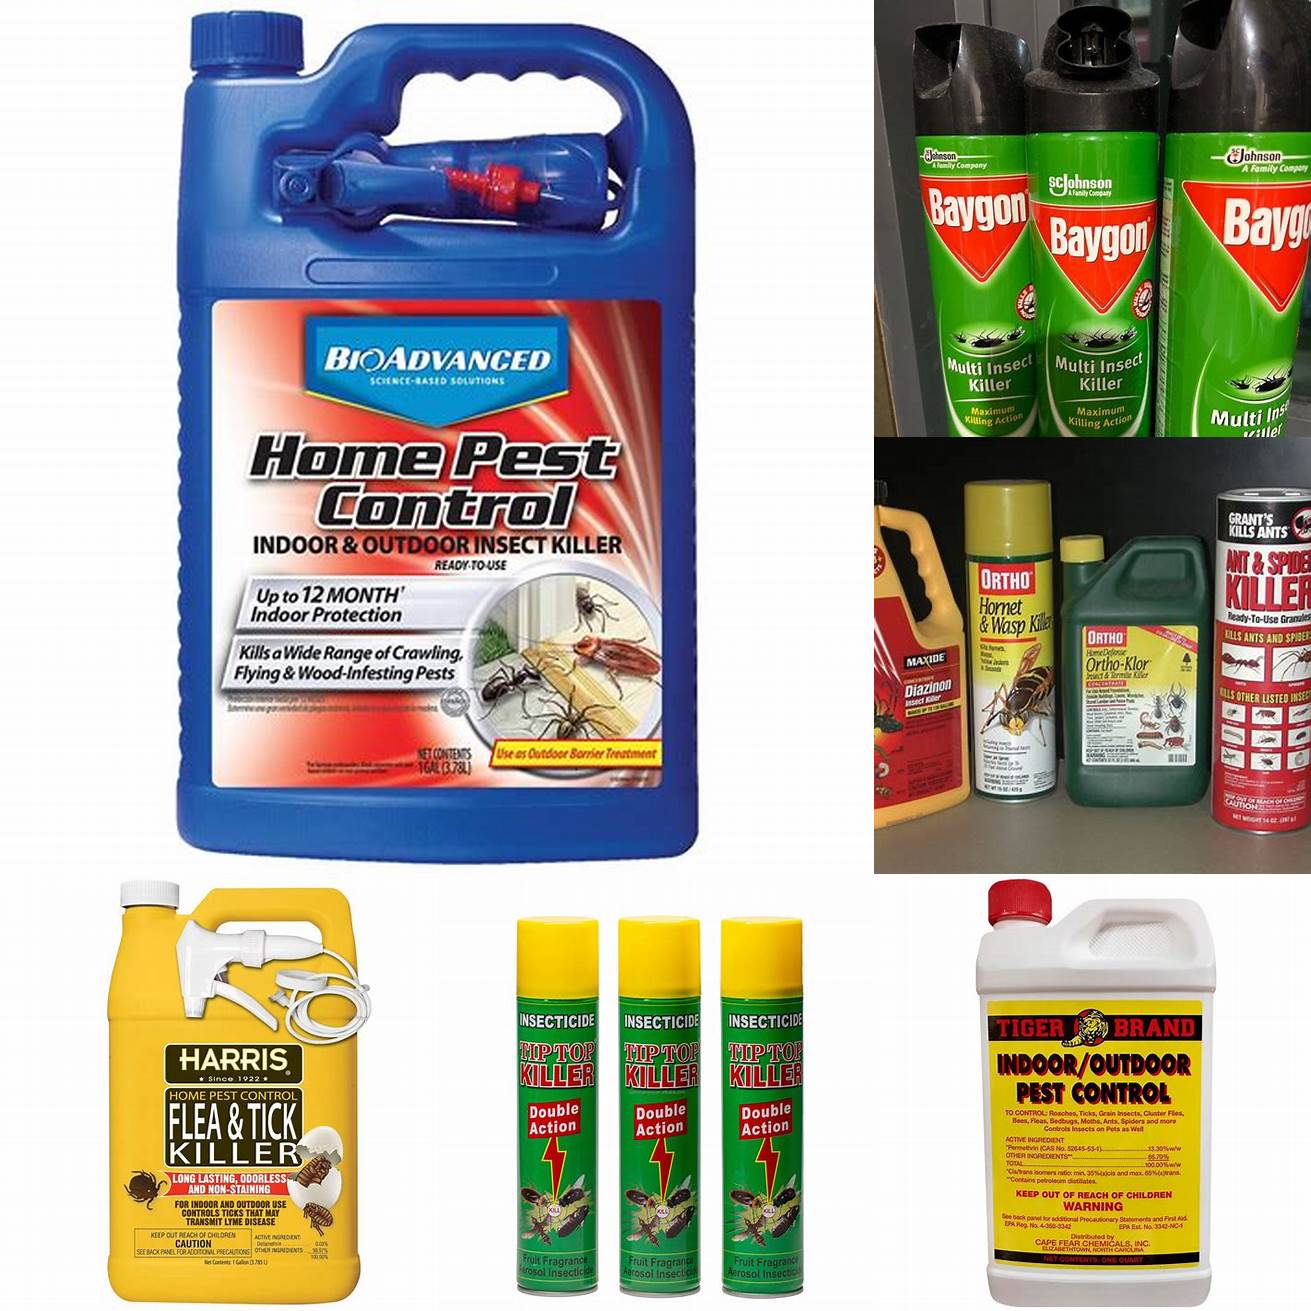 A picture of insecticides